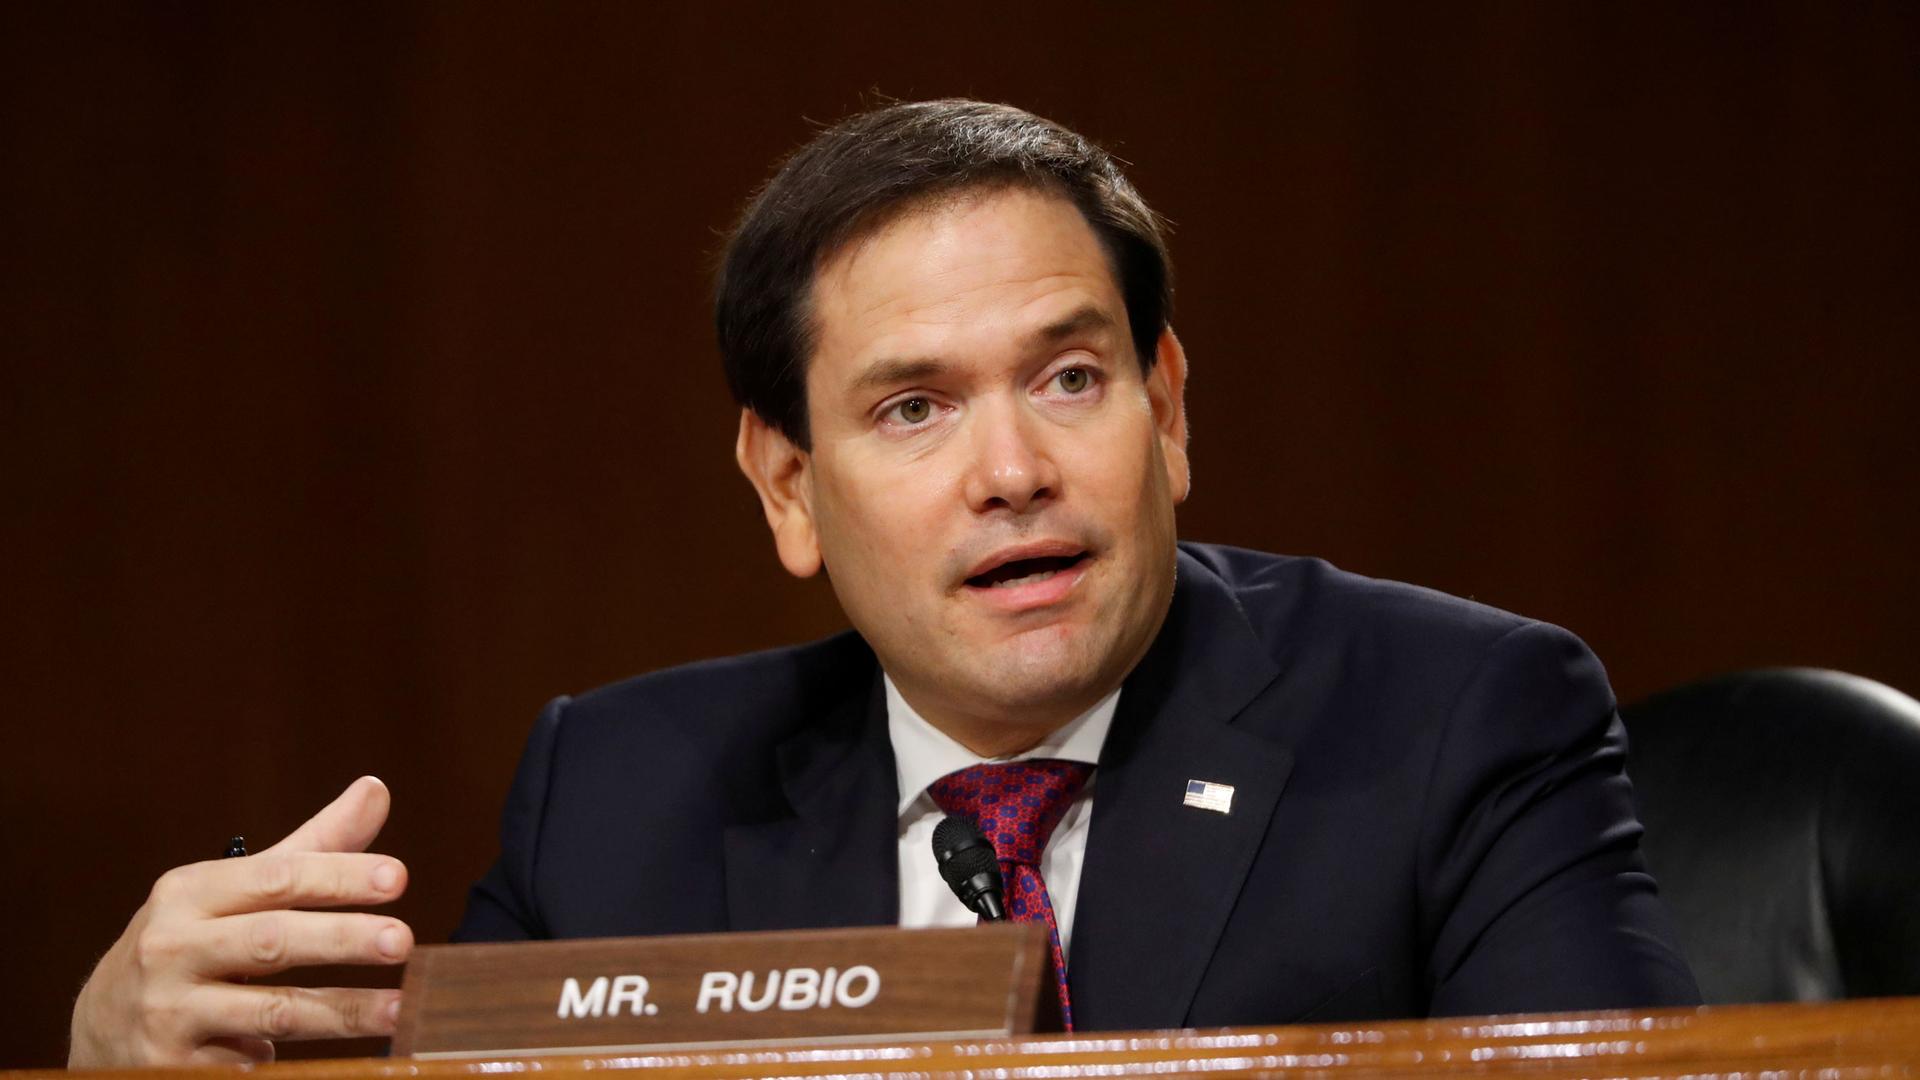 US Sen. Marco Rubio is shown wearing a dark suit and speaking with a small placard in front of him with his name on it.